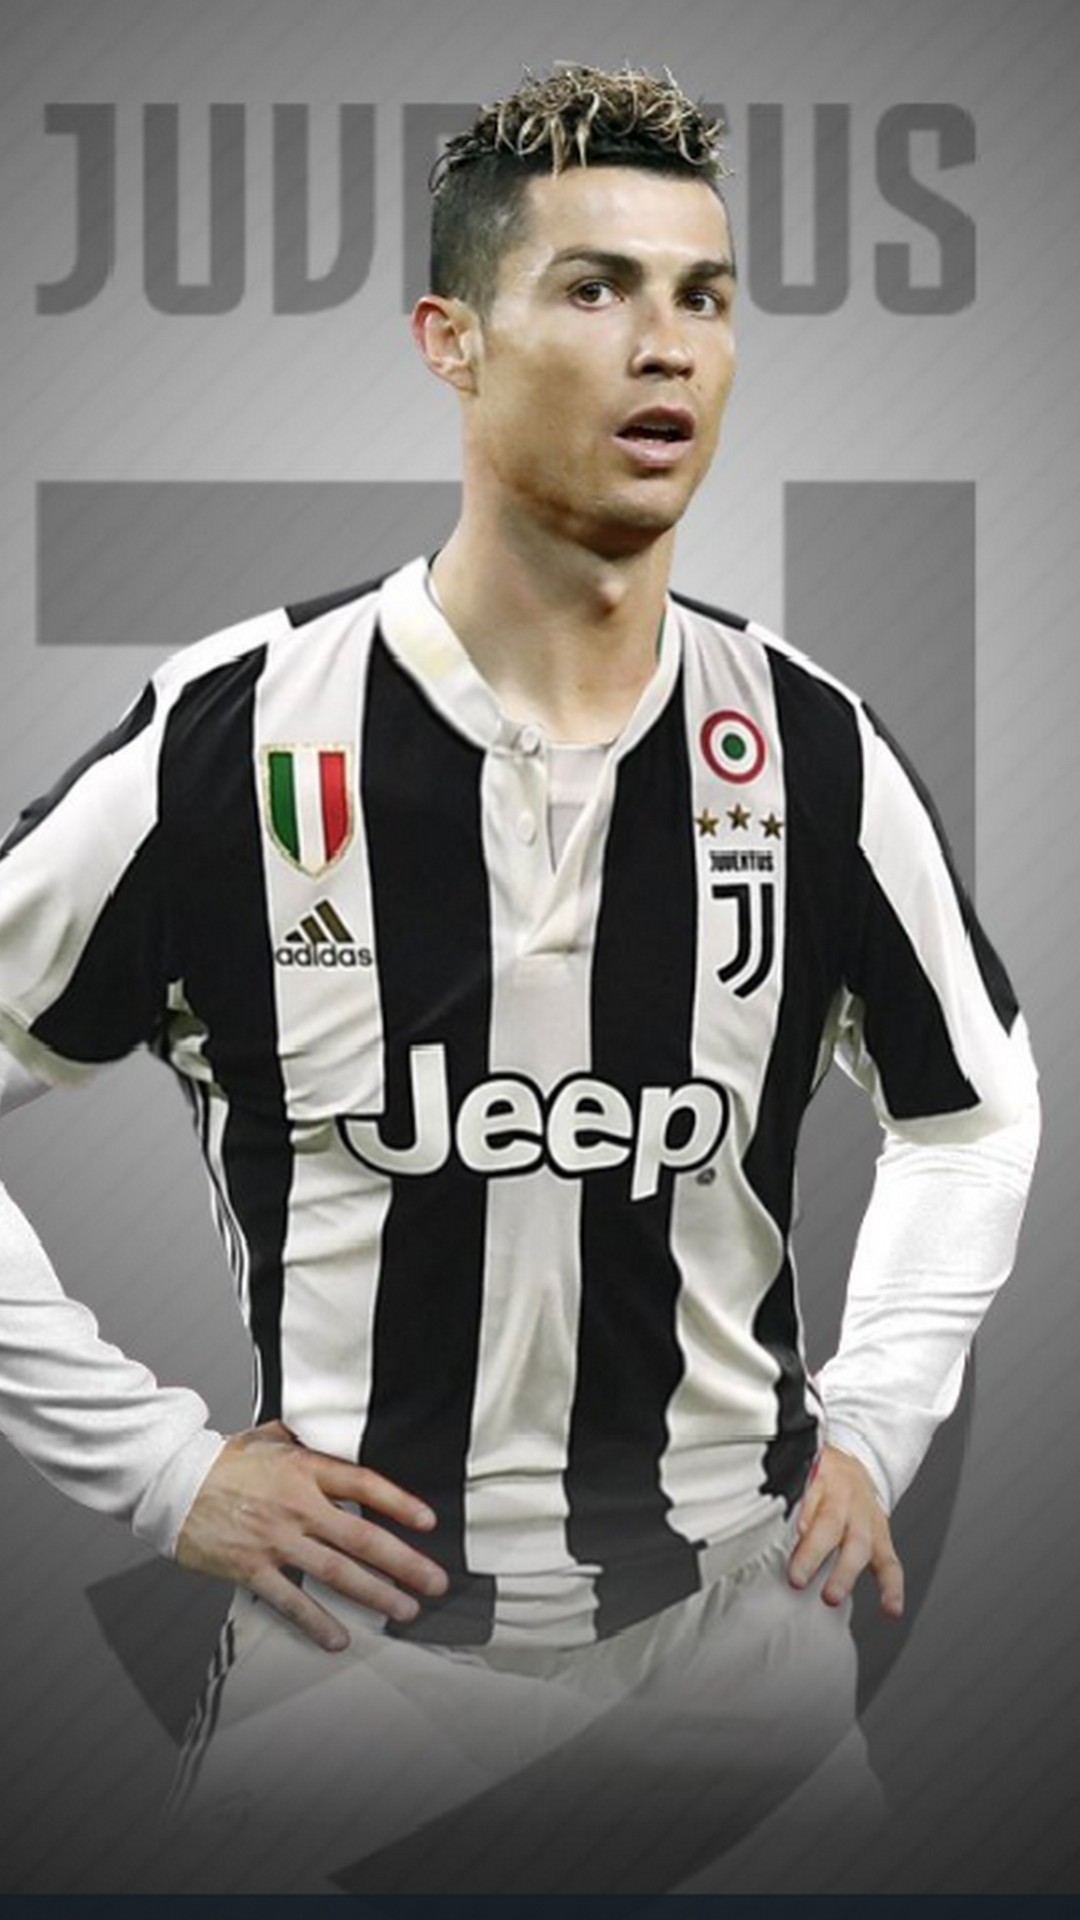 Wallpaper Cristiano Ronaldo Juventus Android With Image - 1080x1920  Wallpaper 